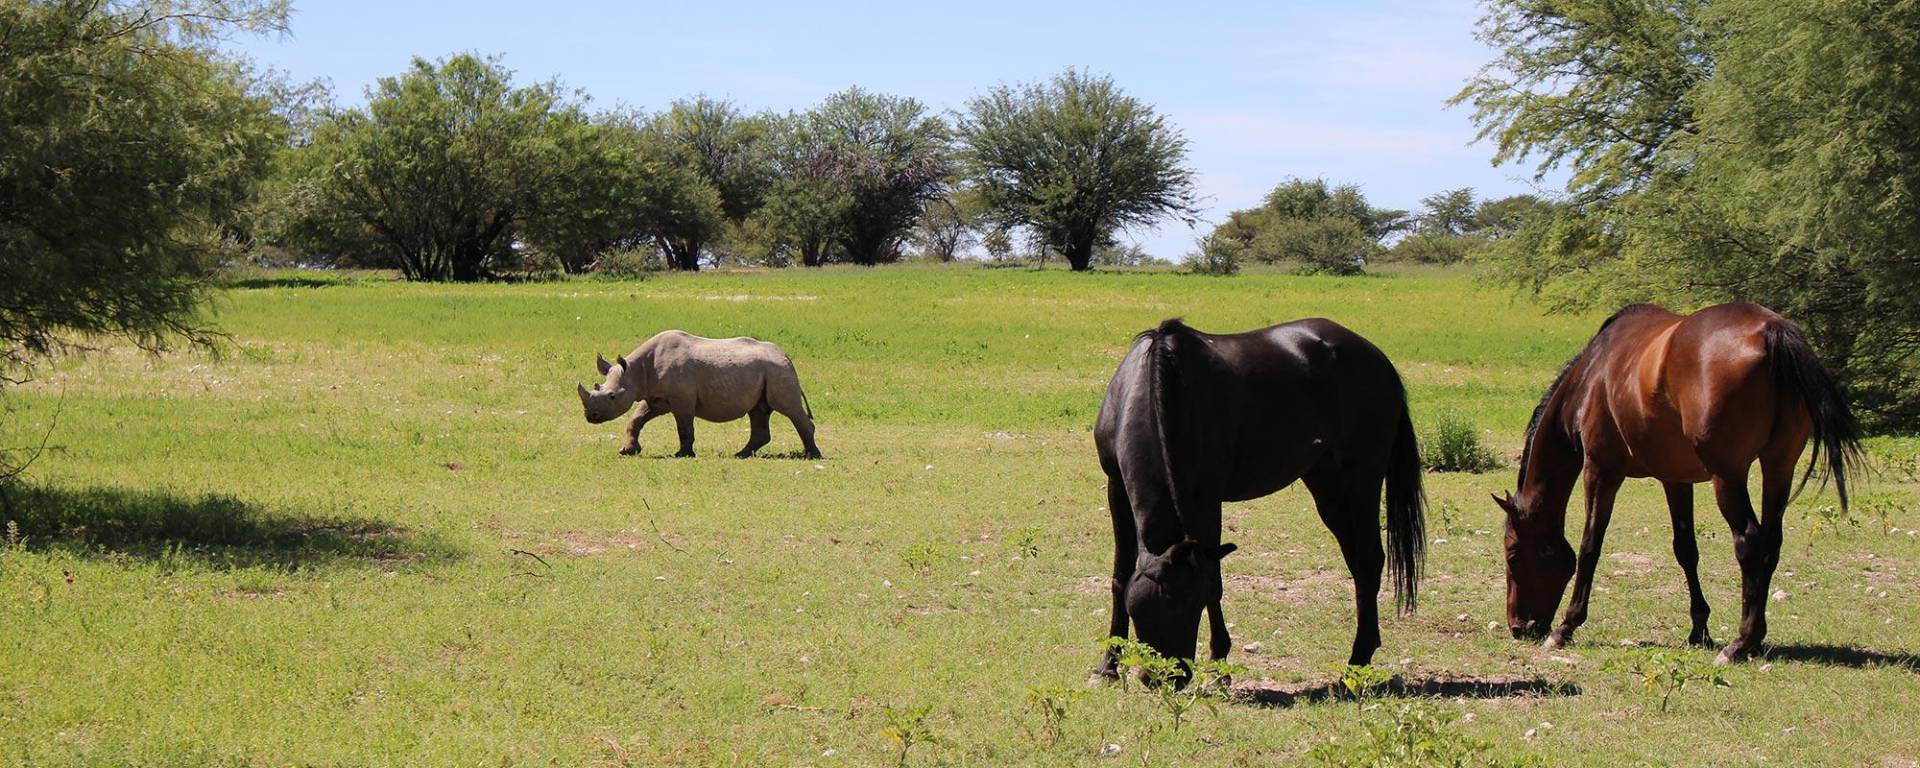 Rhino observation from horse back